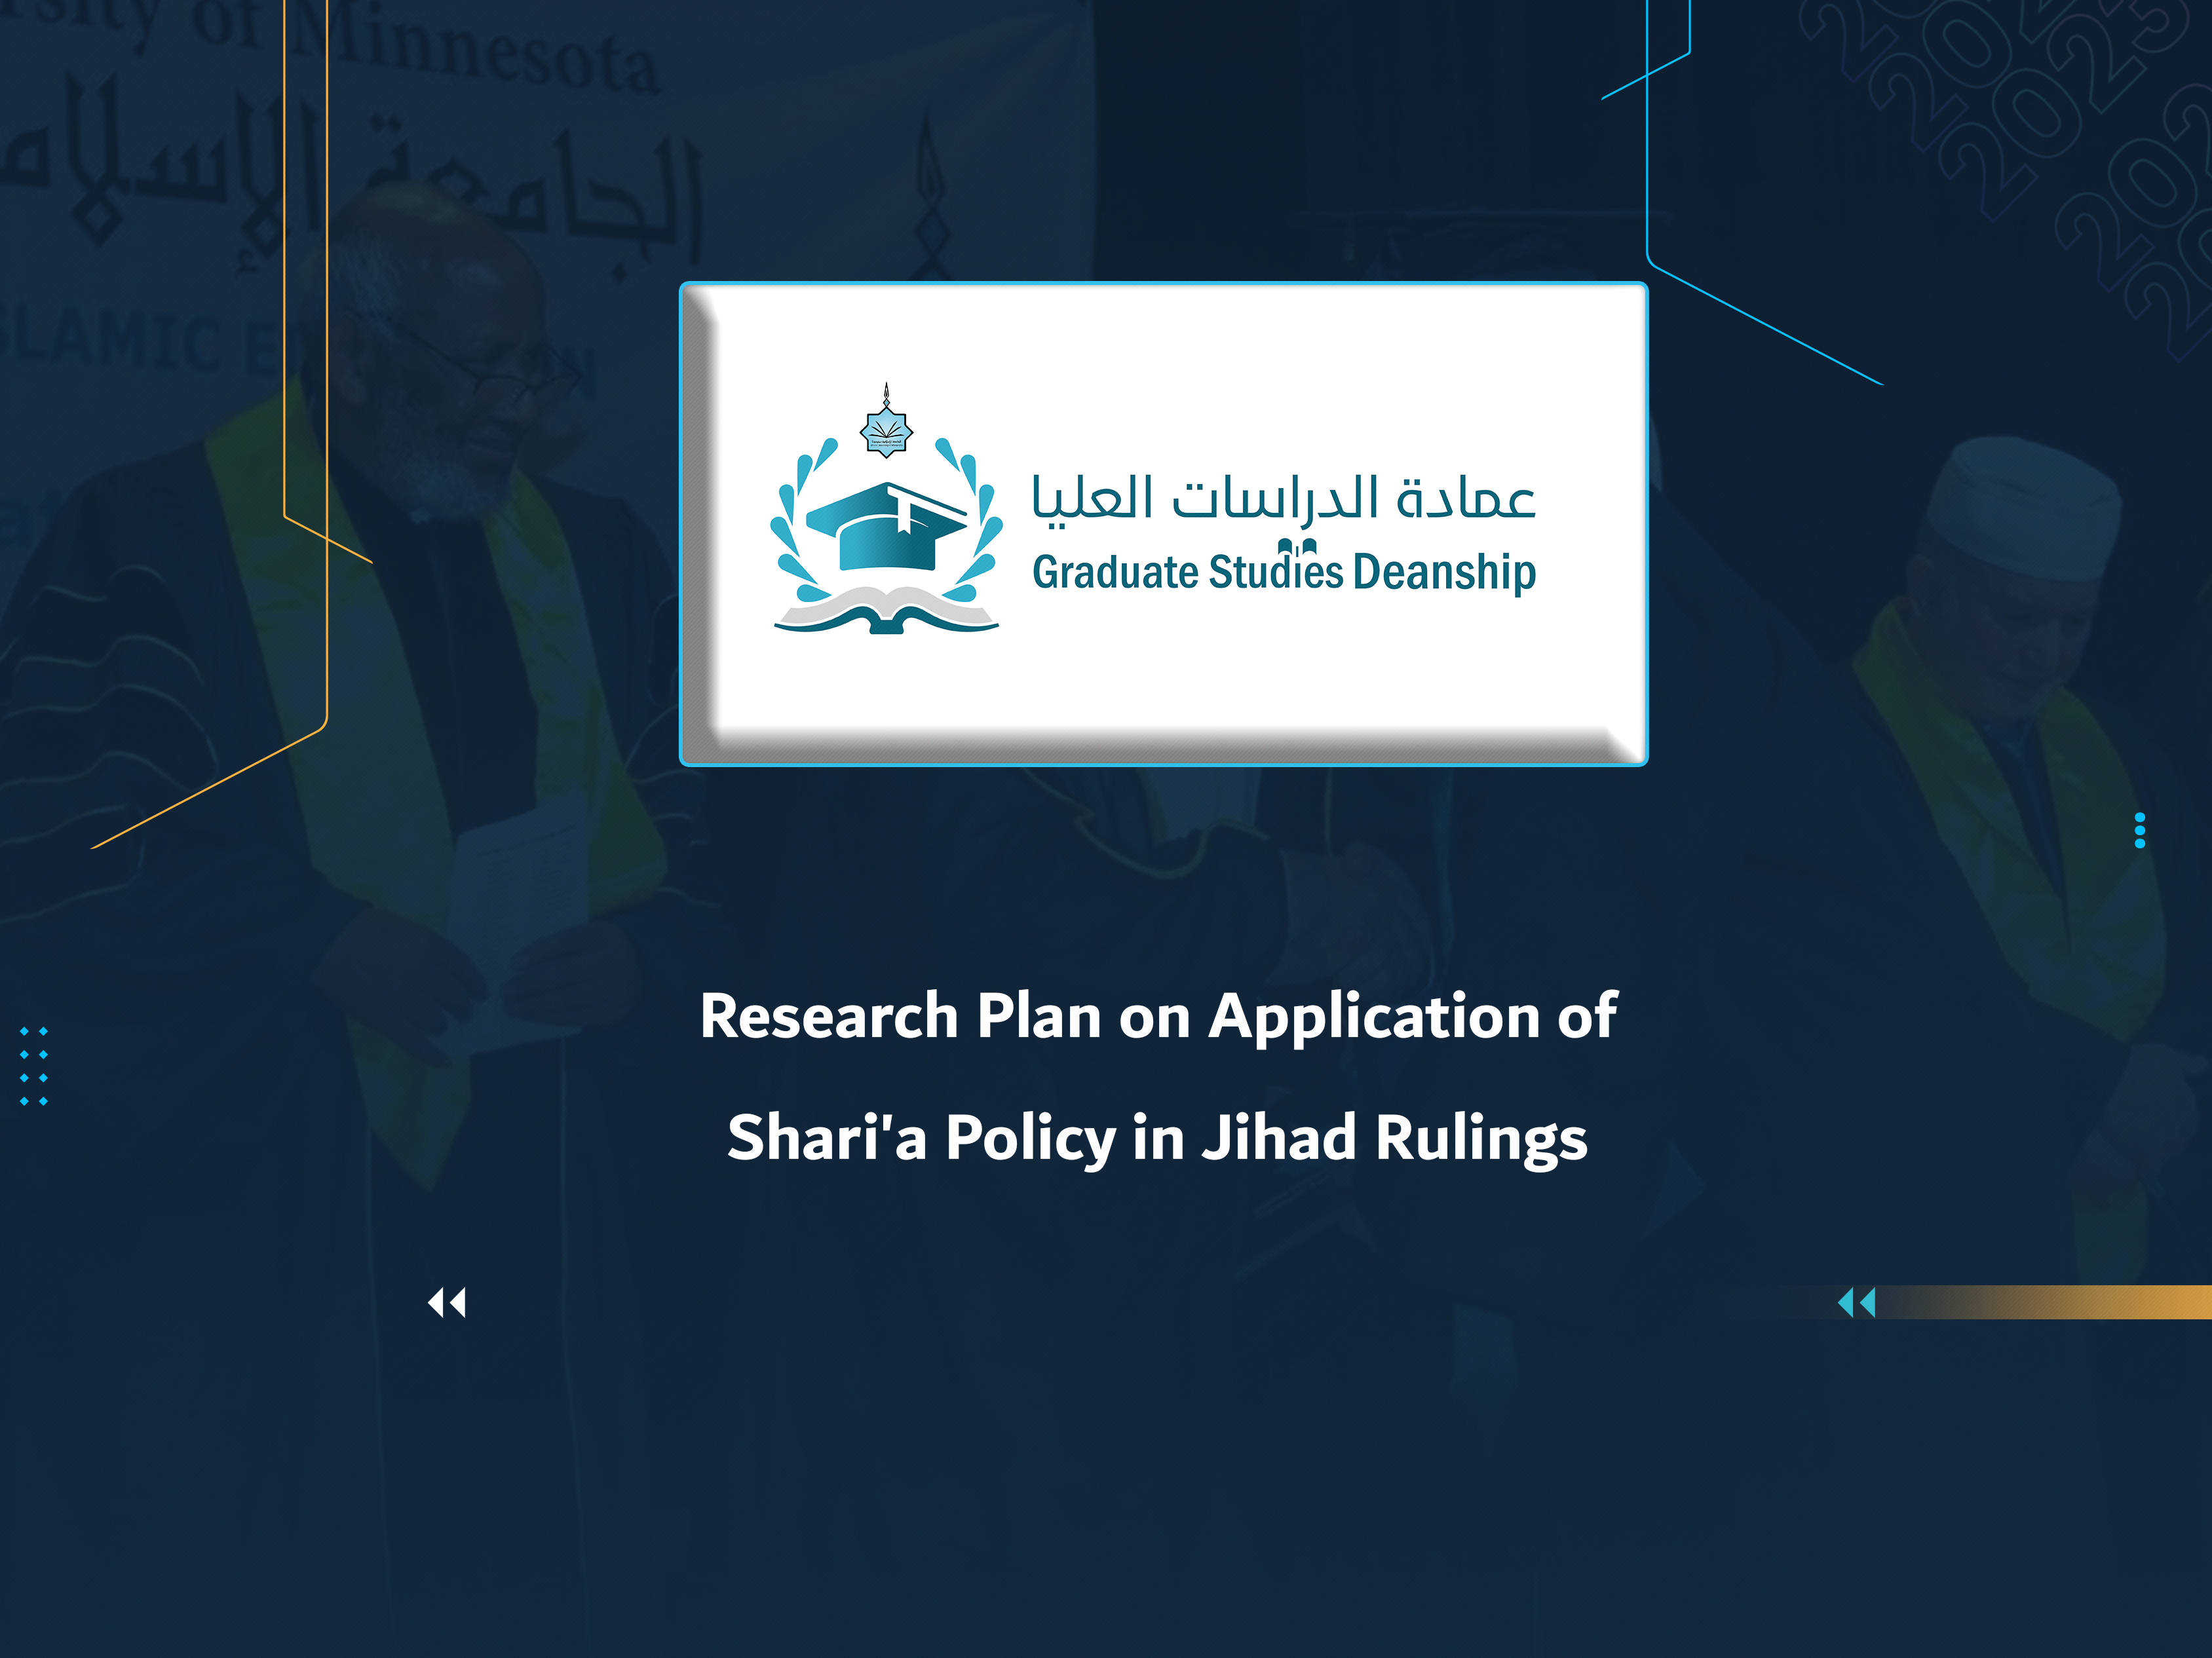 Research Plan on Application of Shari'a Policy in Jihad Rulings